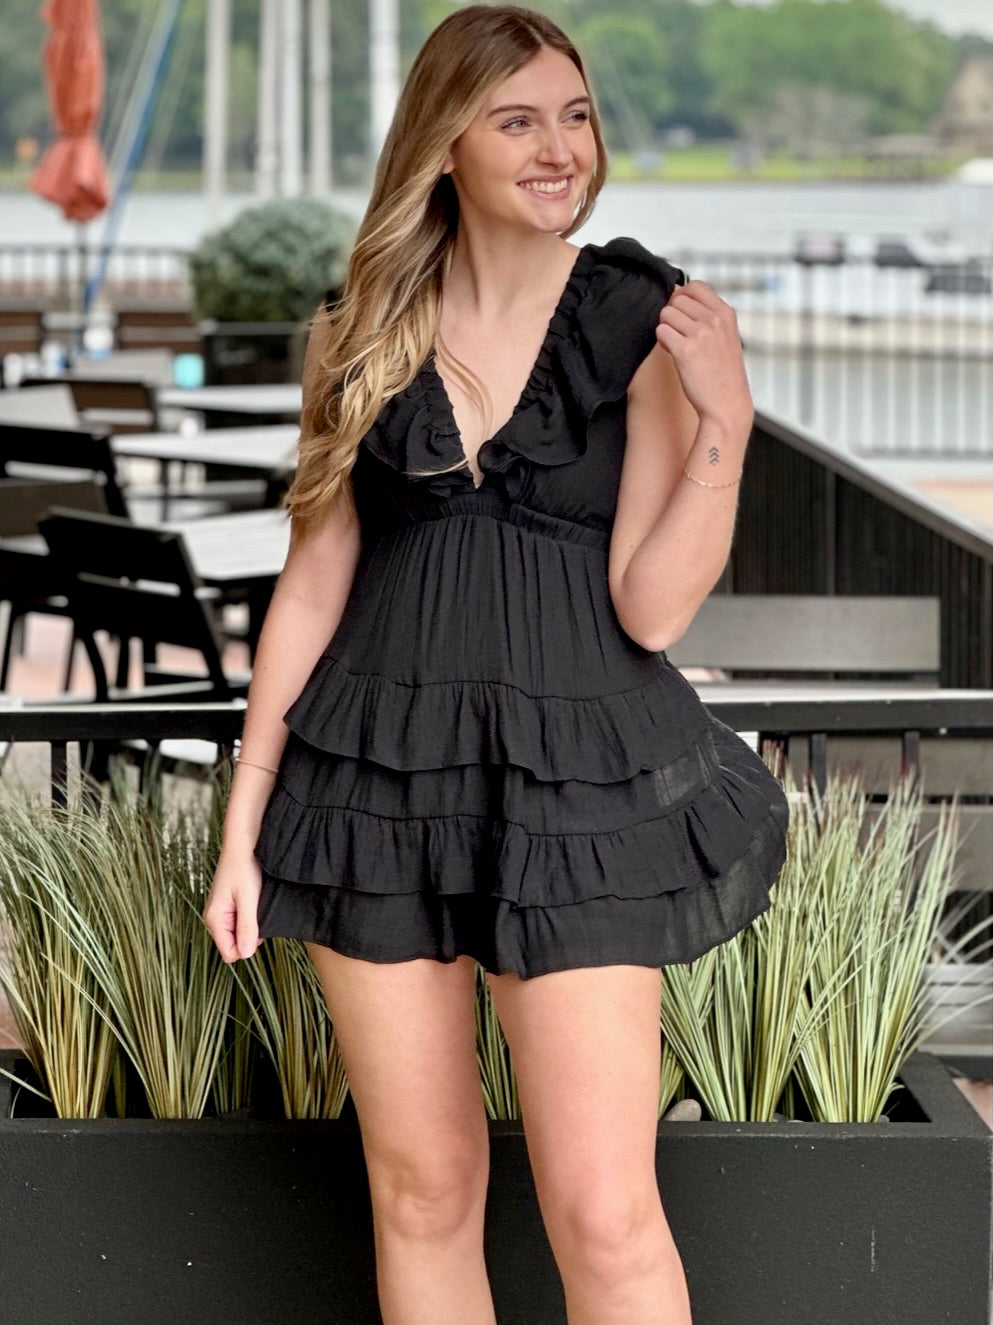 Lexi in black dress looking to the side